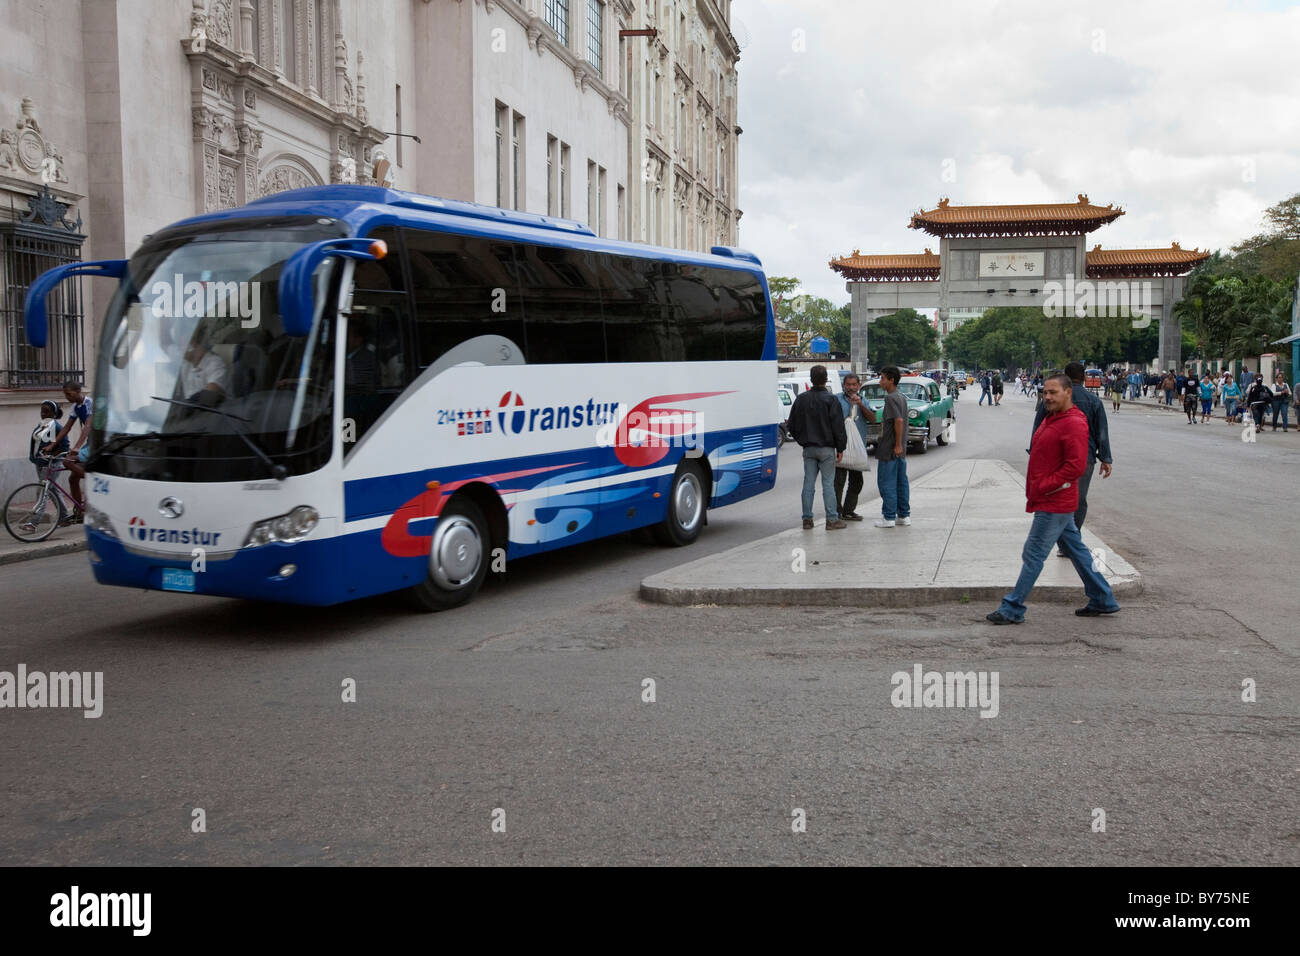 Cuba, Havana. Modern Tour Buses Serve Cuba's Tourism Industry. Gate Marking Exit From China Town in Background. Stock Photo